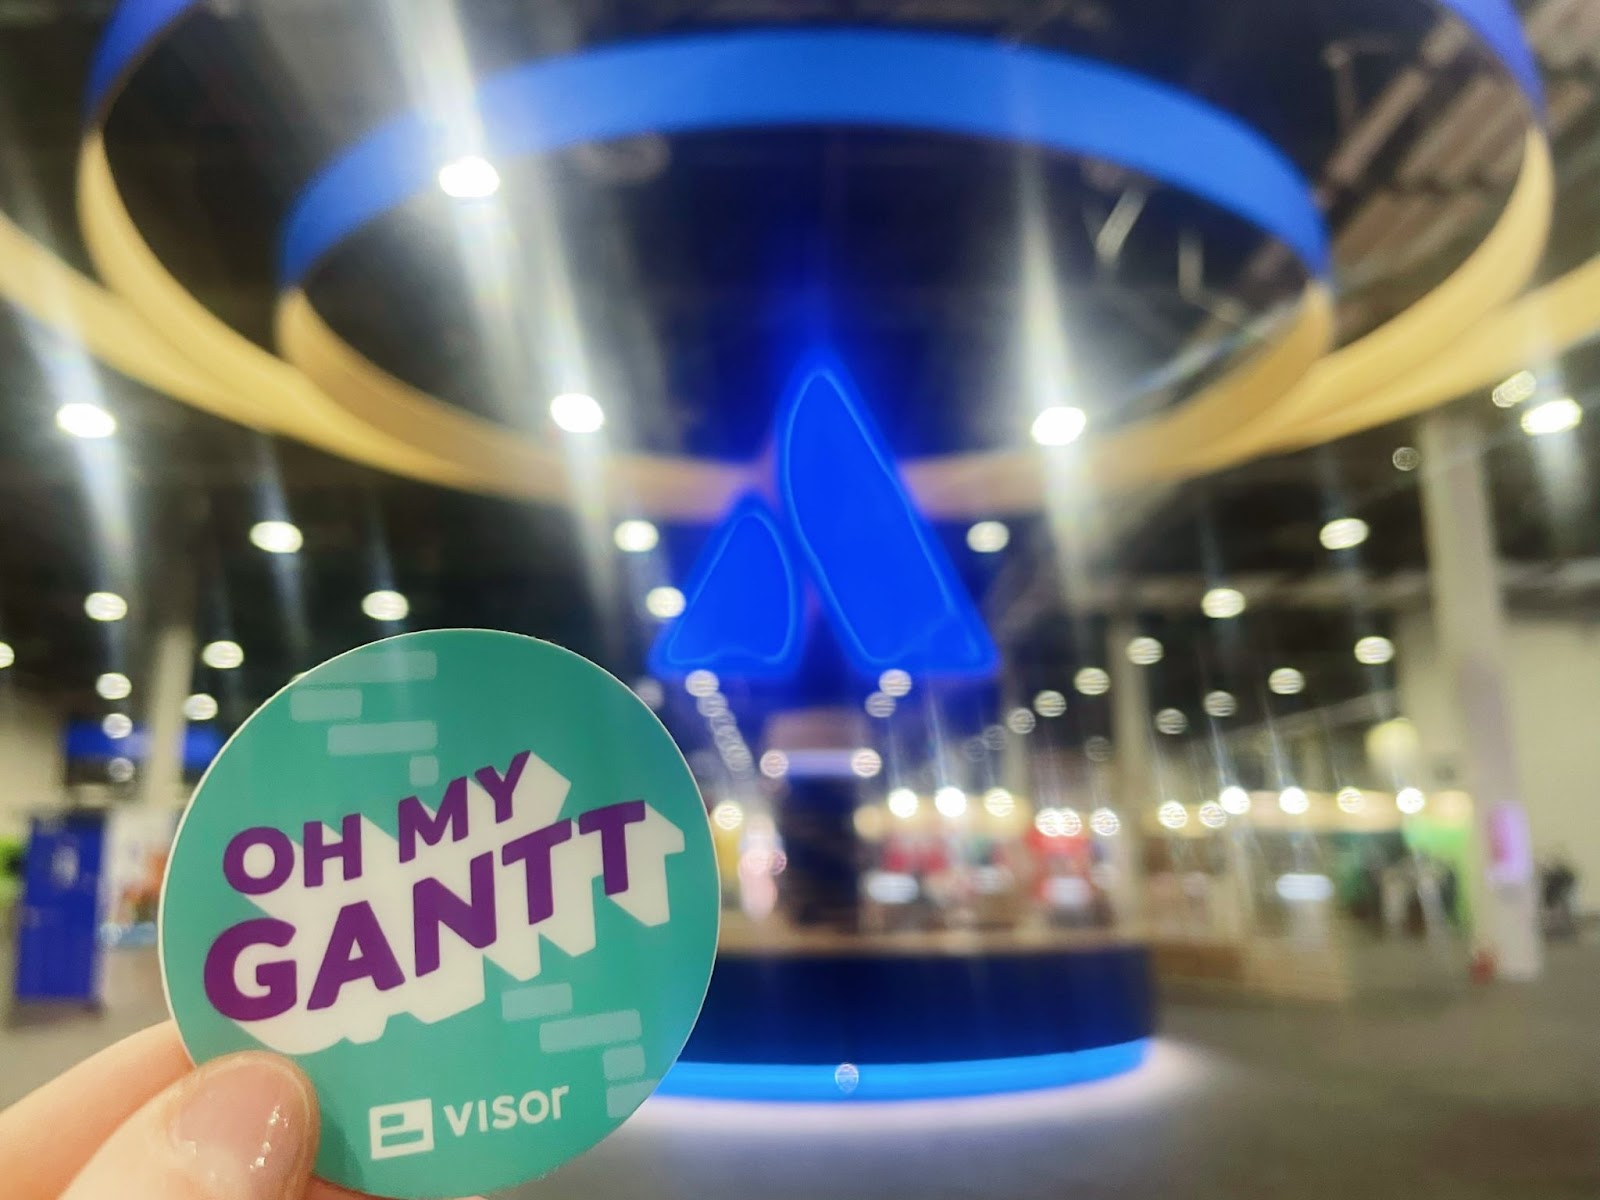 A sticker reading “oh my gantt” held up in front of the Atlassian logo in the expo hall